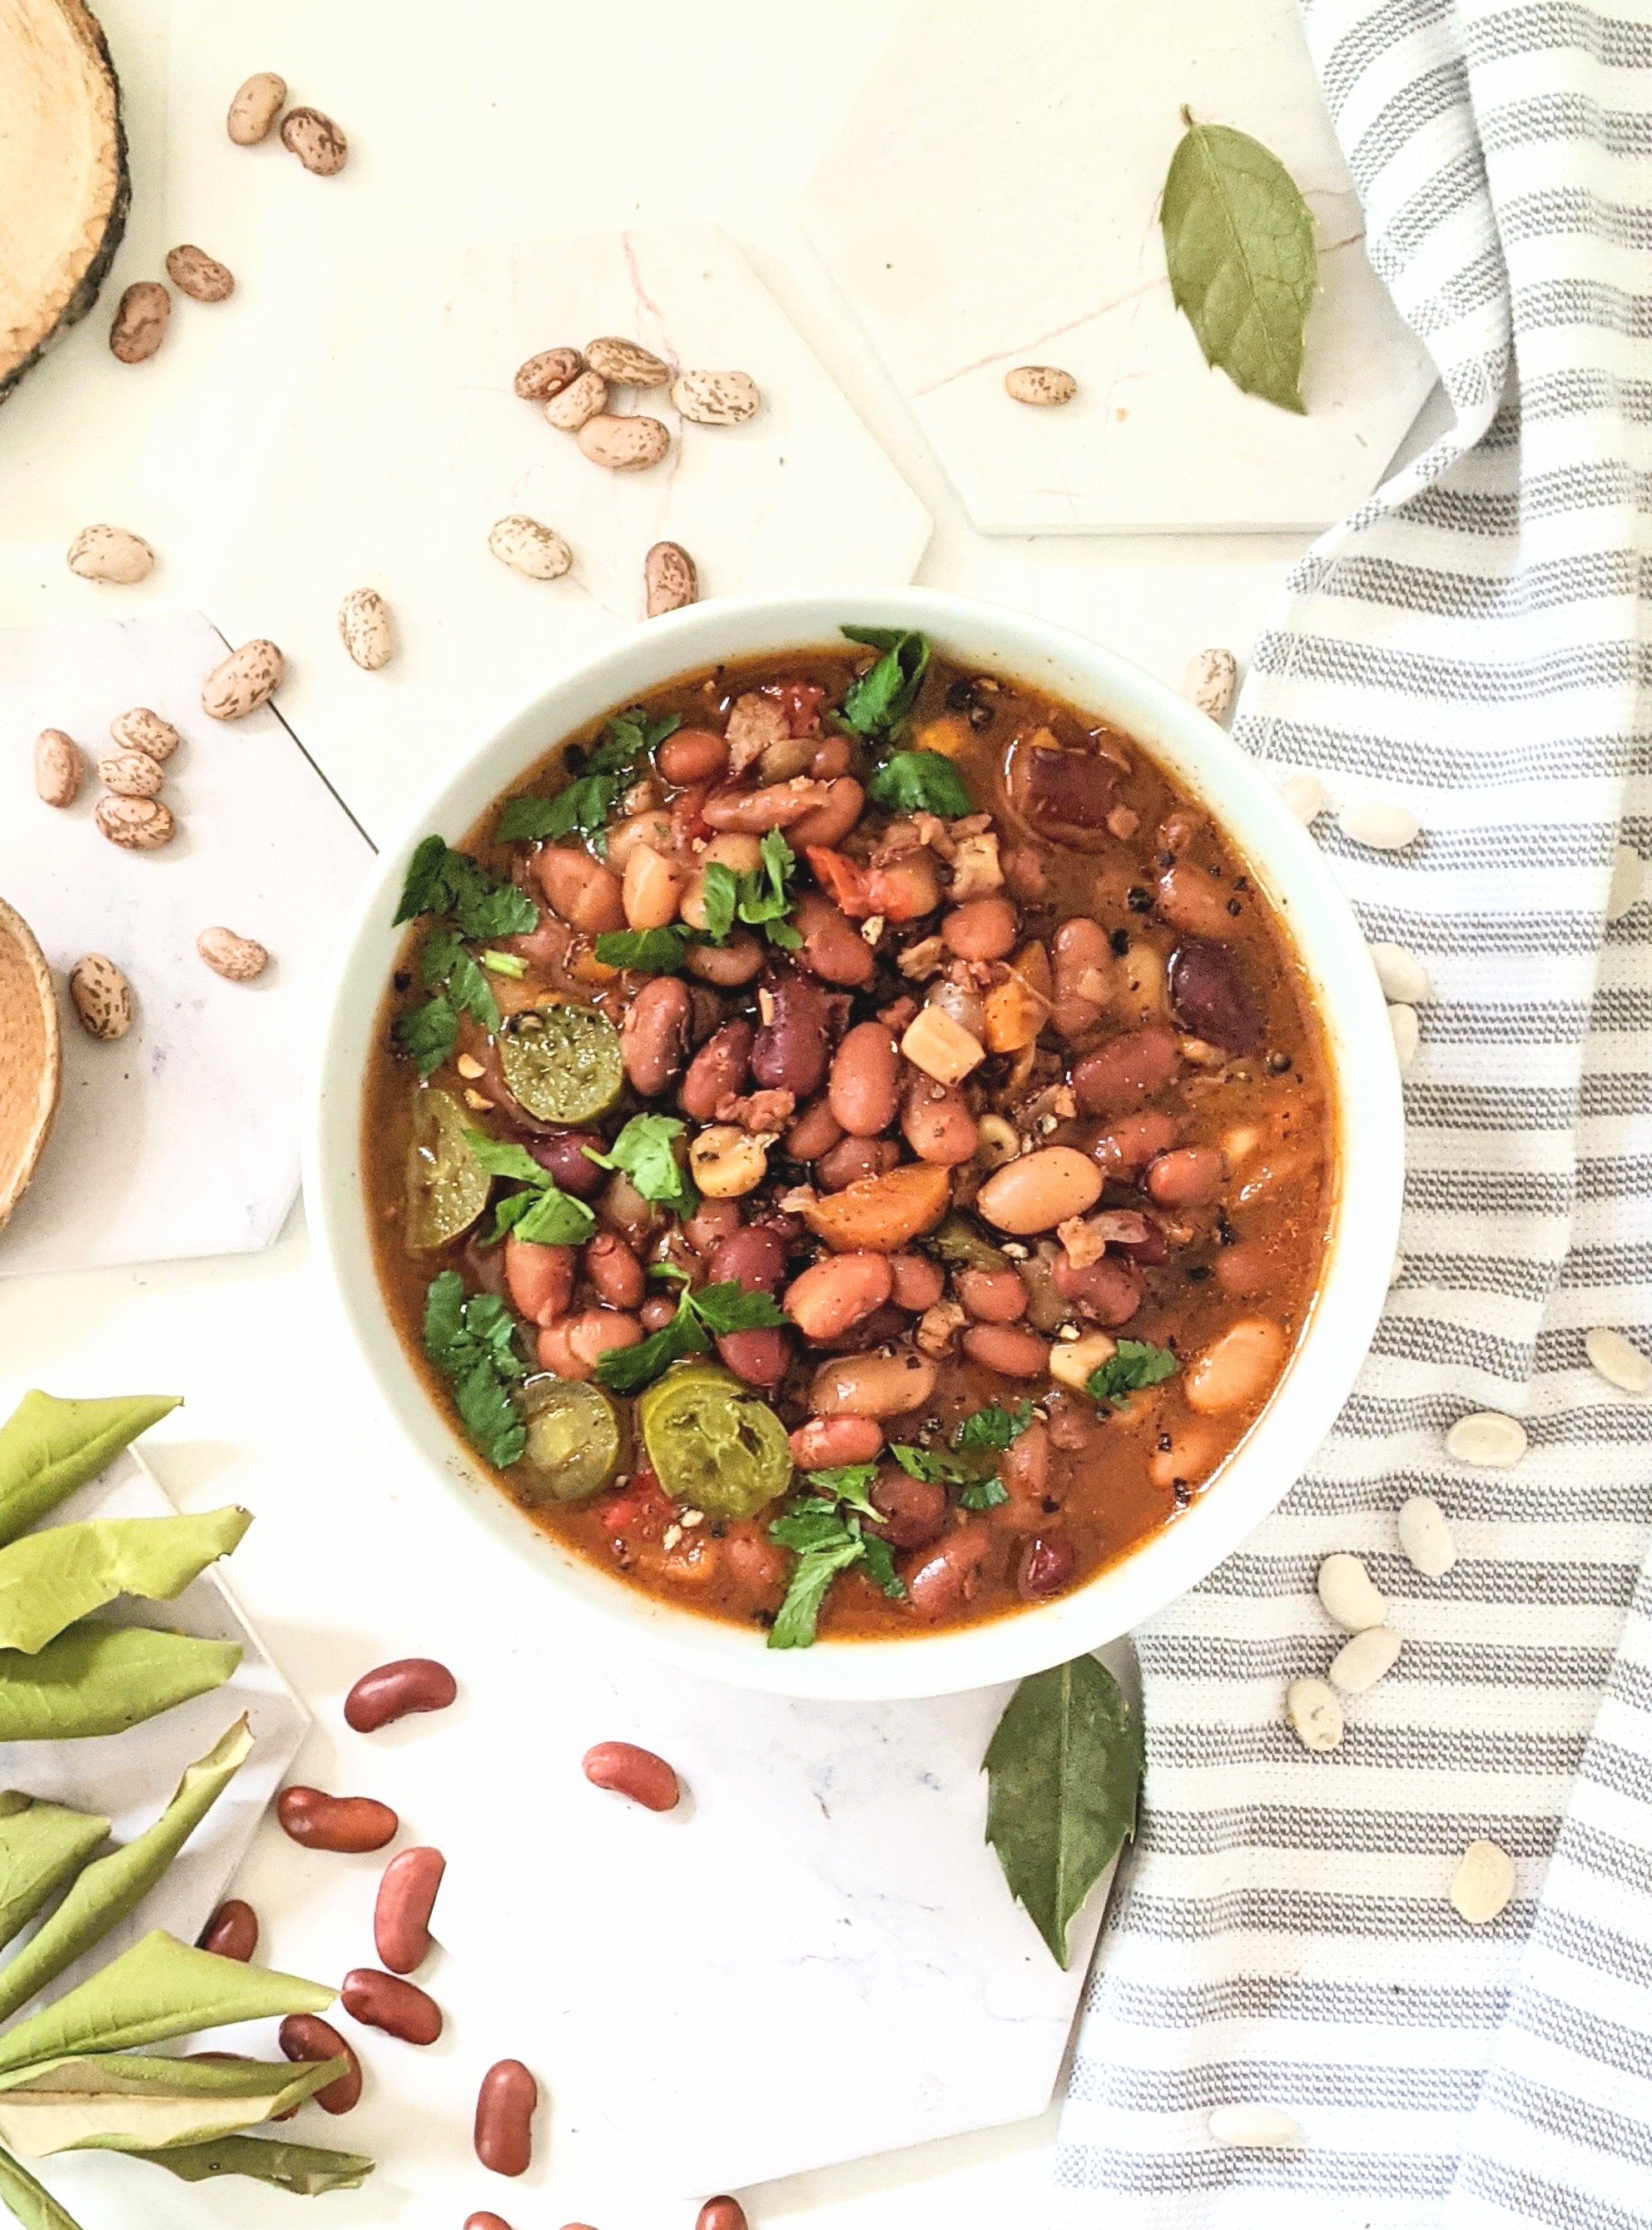 vegan cowboy bean recipes healthy high protein bean stews vegetarian meatless lunch ideas with pinto beans kidney beand and navy beans no meat dinners fillinig plant based stews